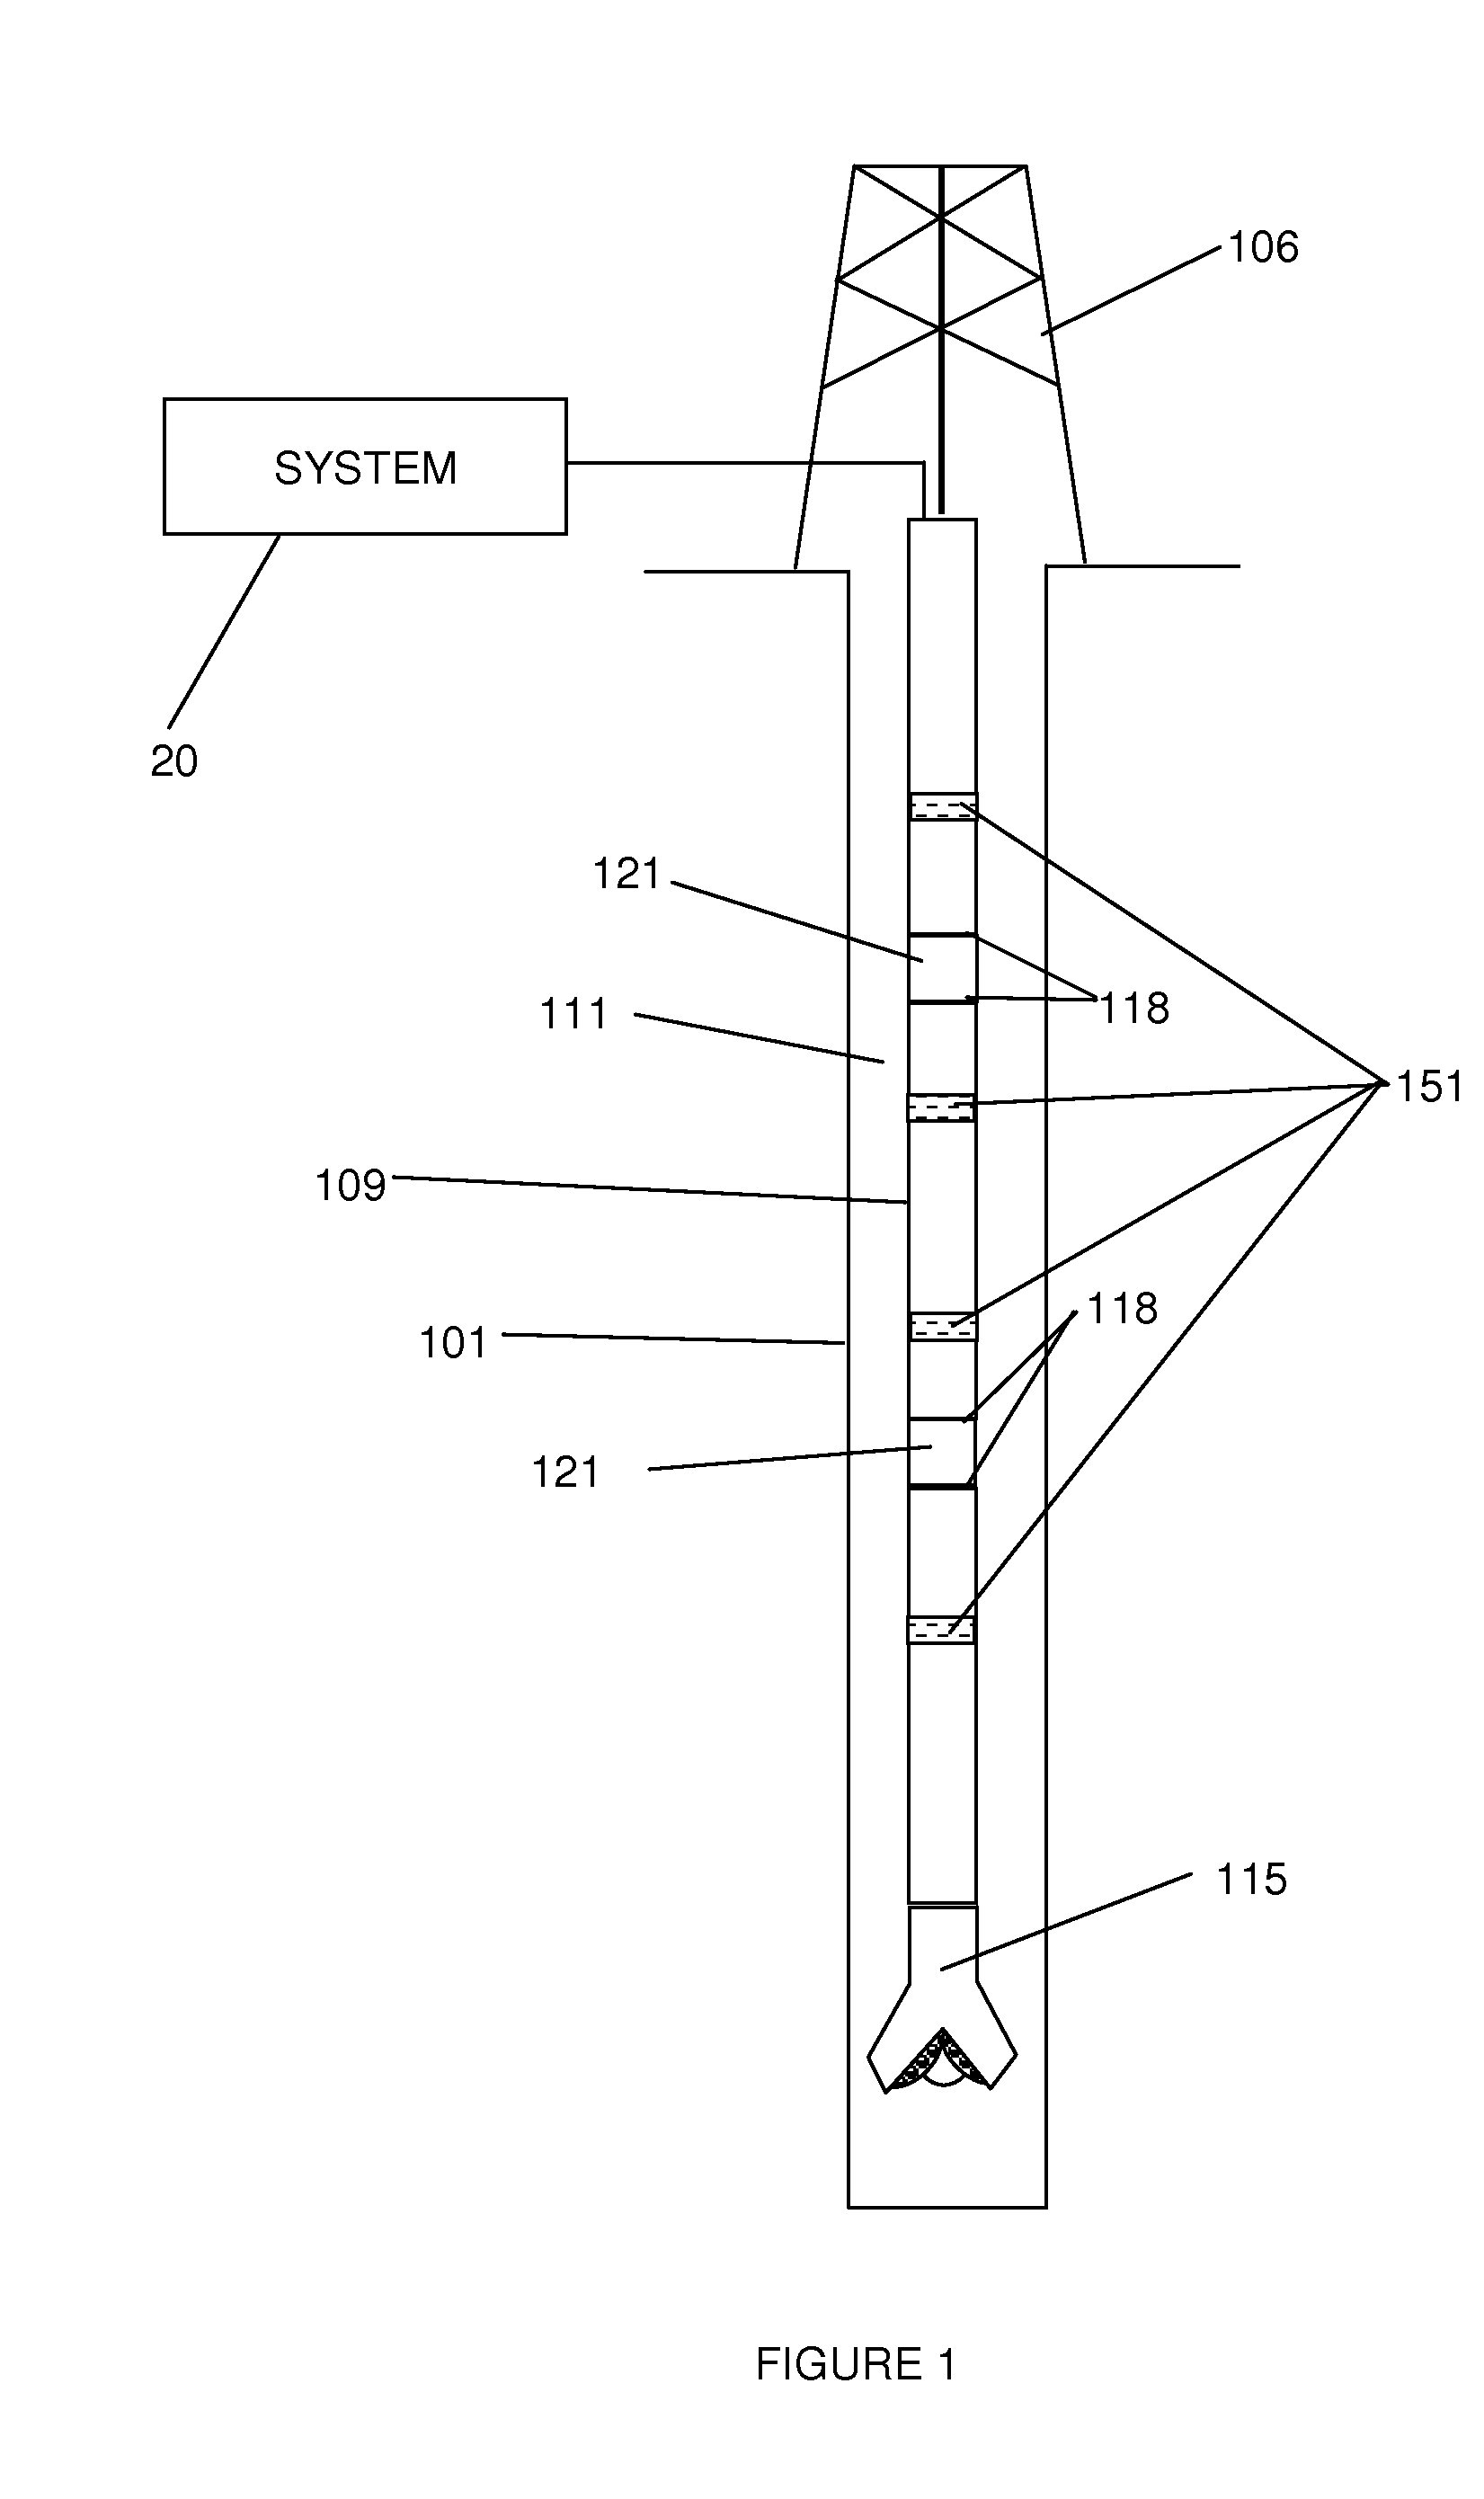 Method of determining borehole conditions from distributed measurement data